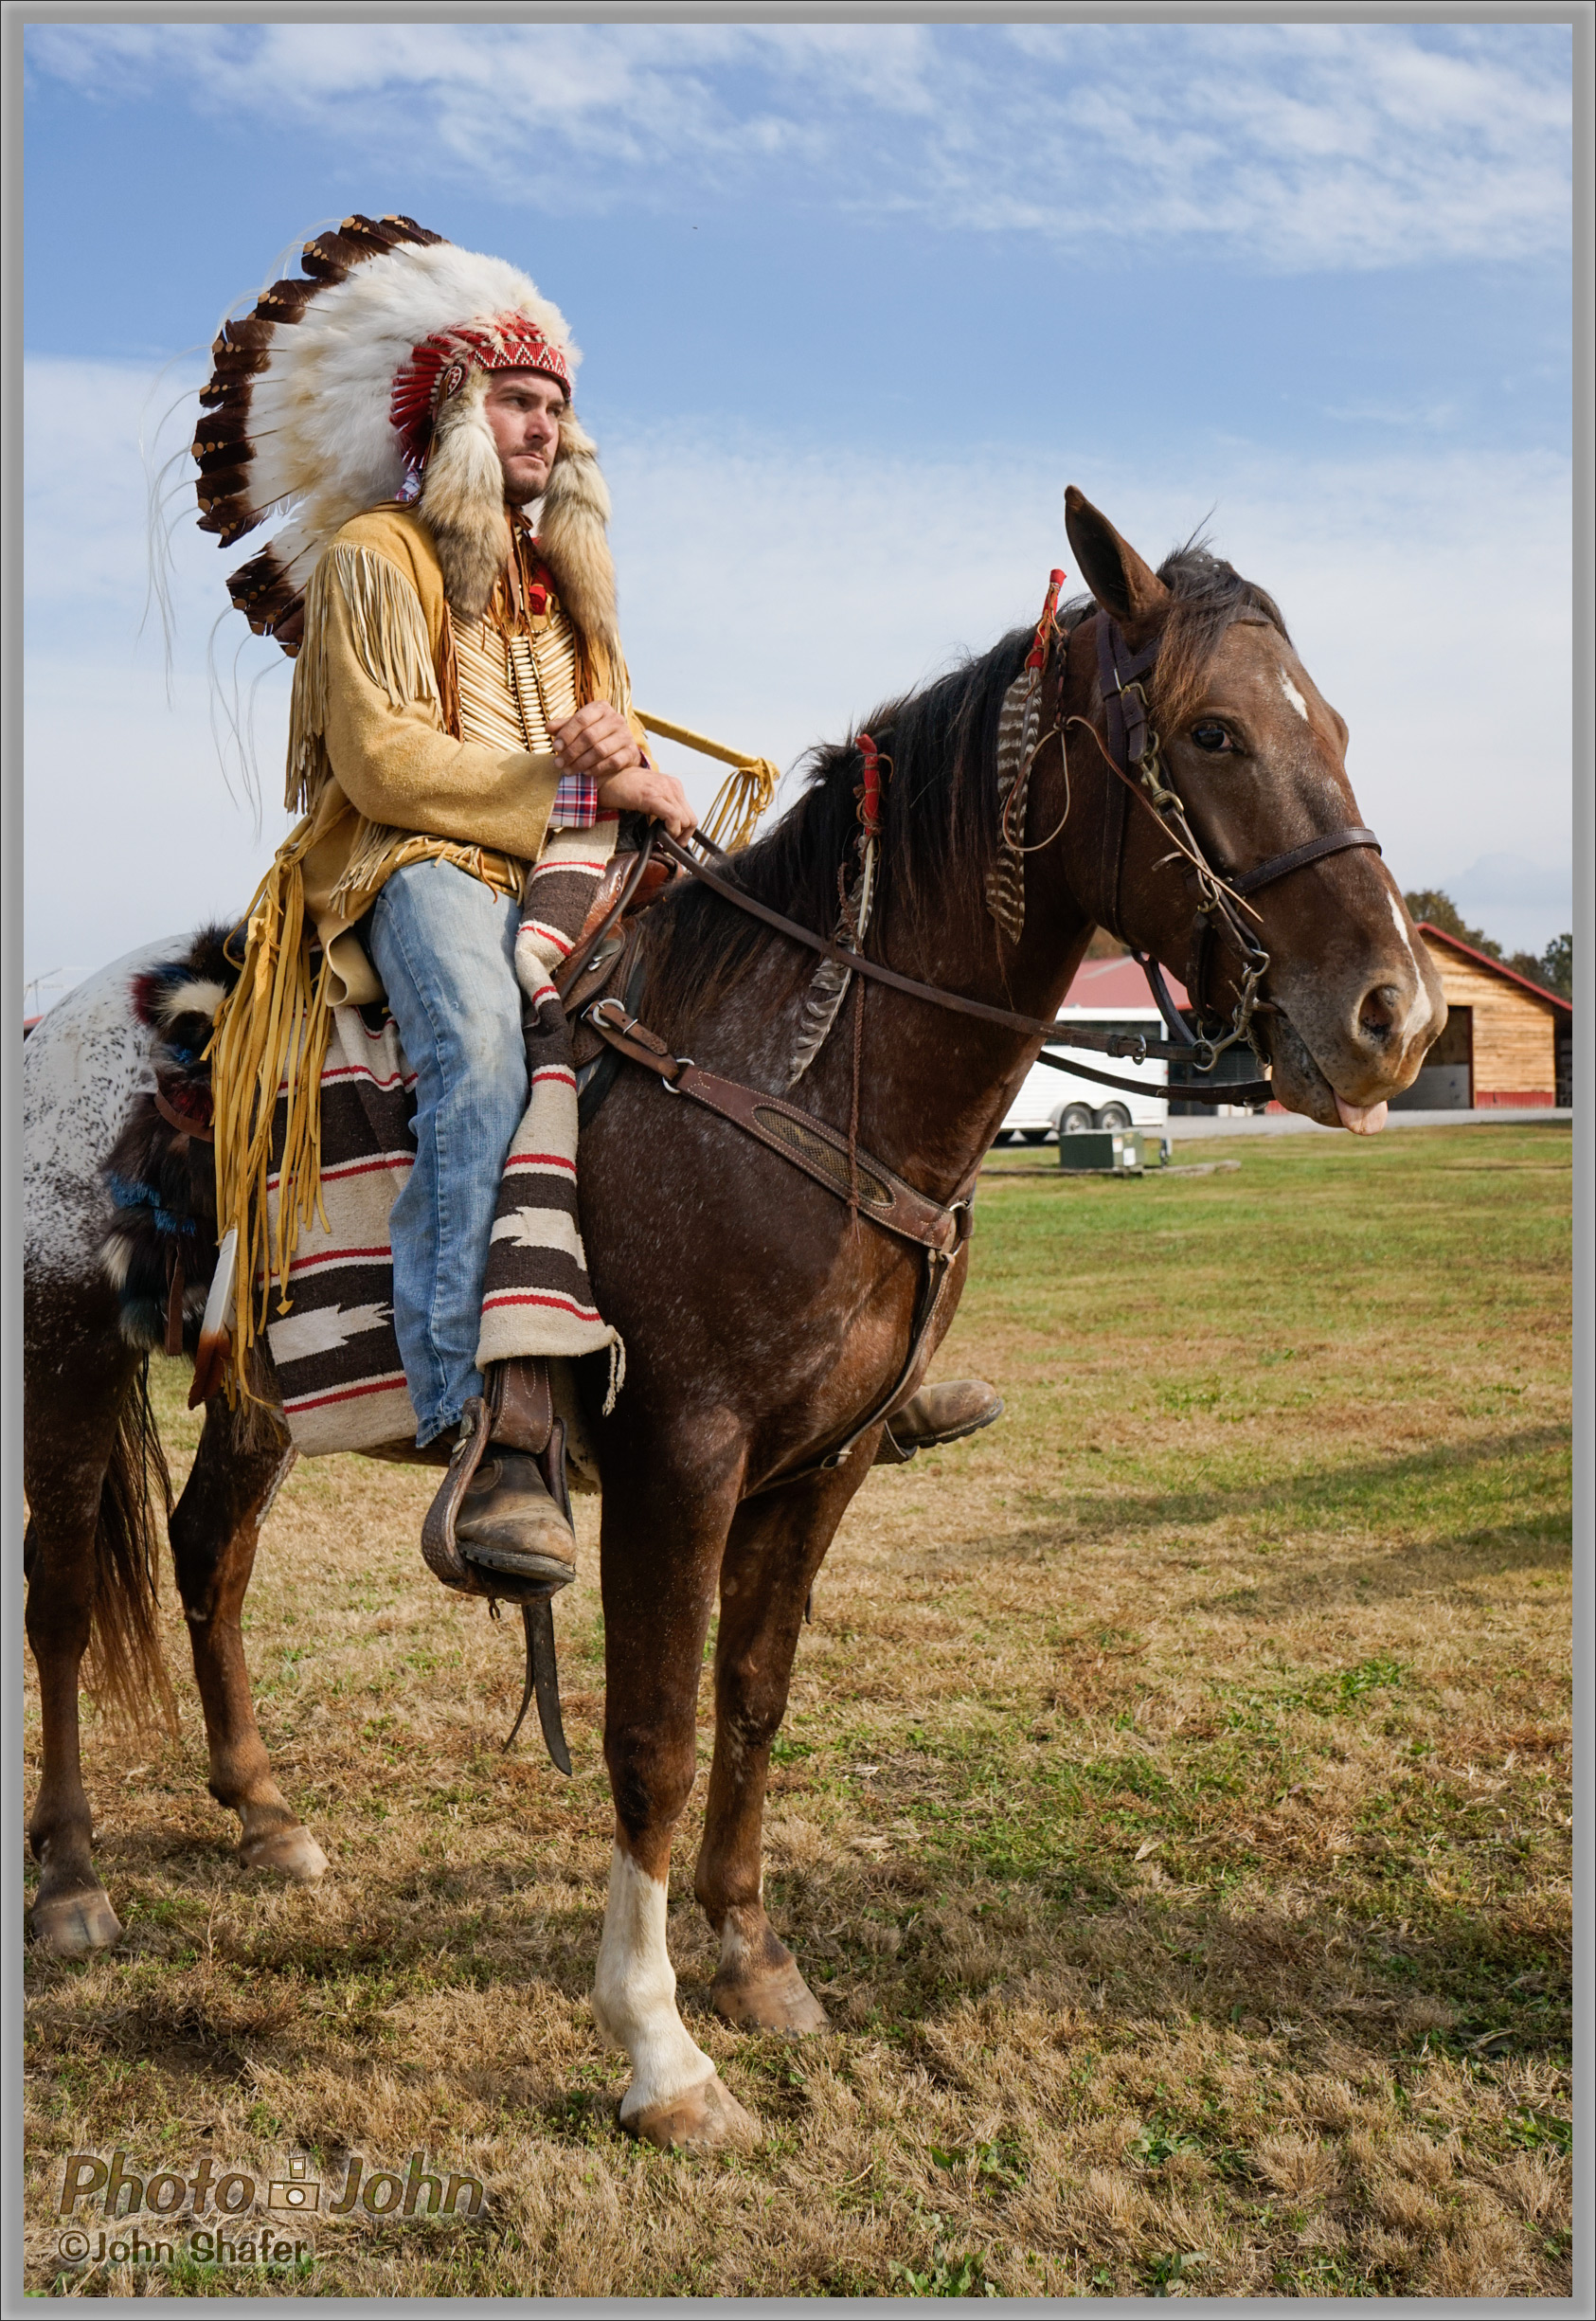 Sony Alpha A7 - Horseman In Indian Costume